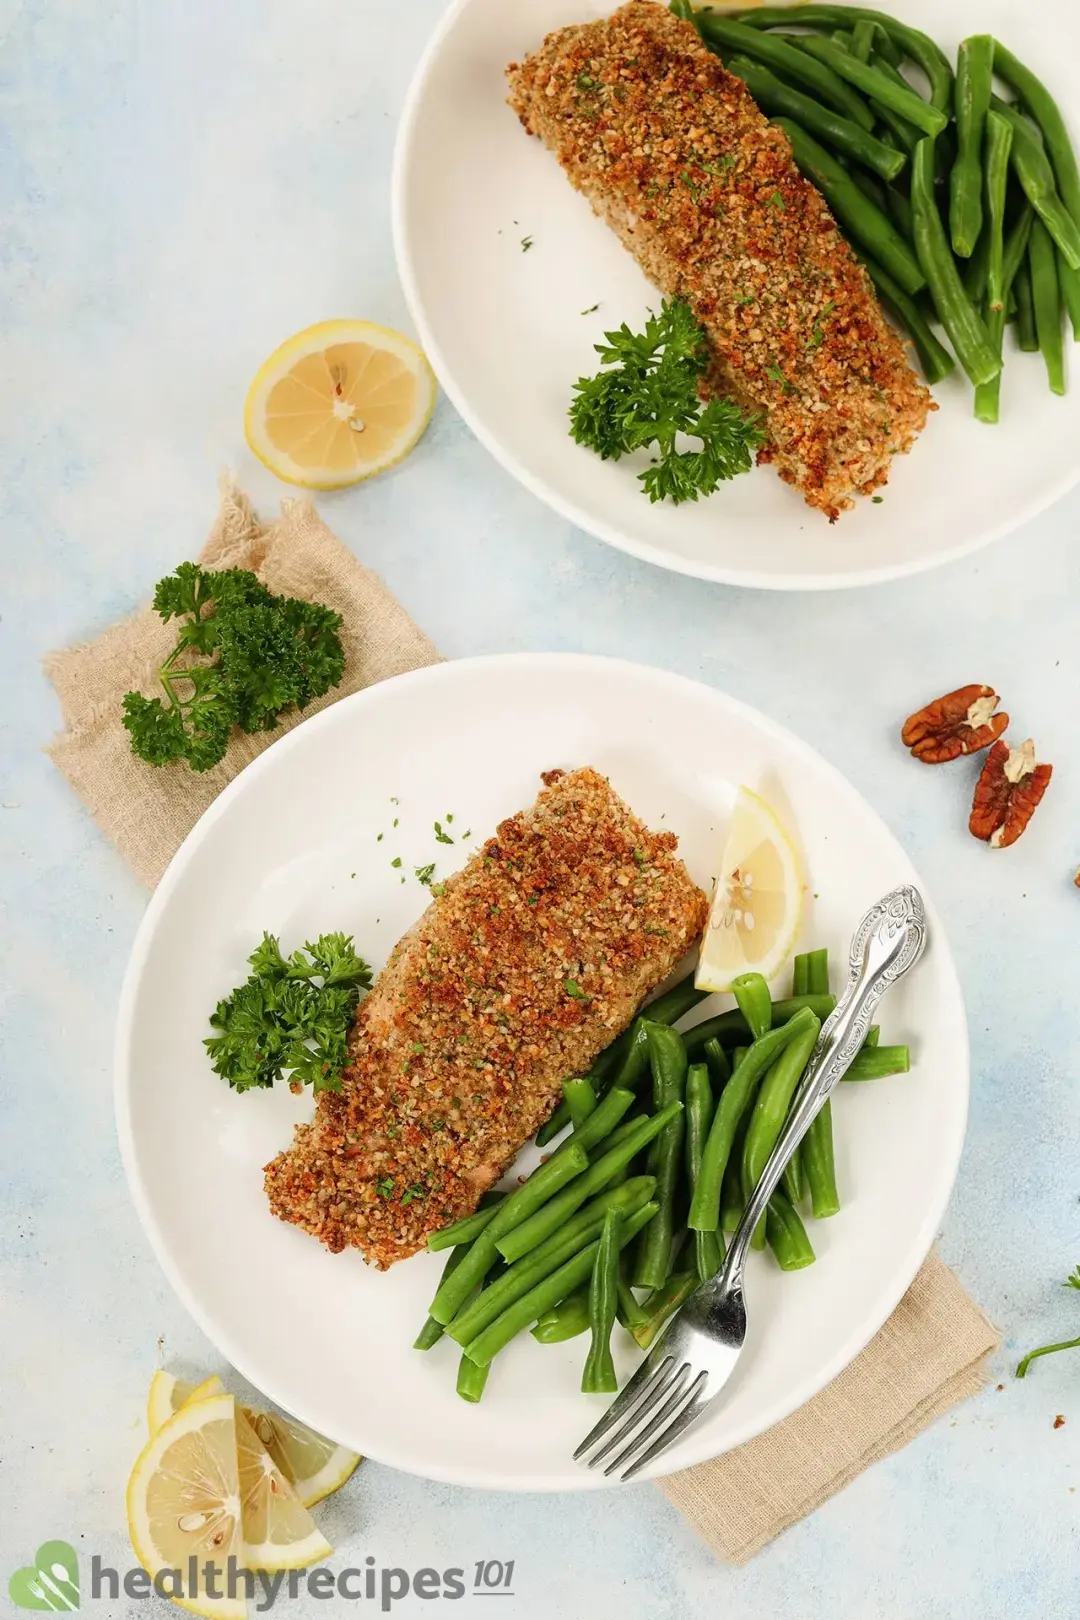 Two dishes represent two complete servings, on each there are one filet of pecan-crusted salmon, cooked green beans, parsley, lemon slices, and a food-use serving fork.